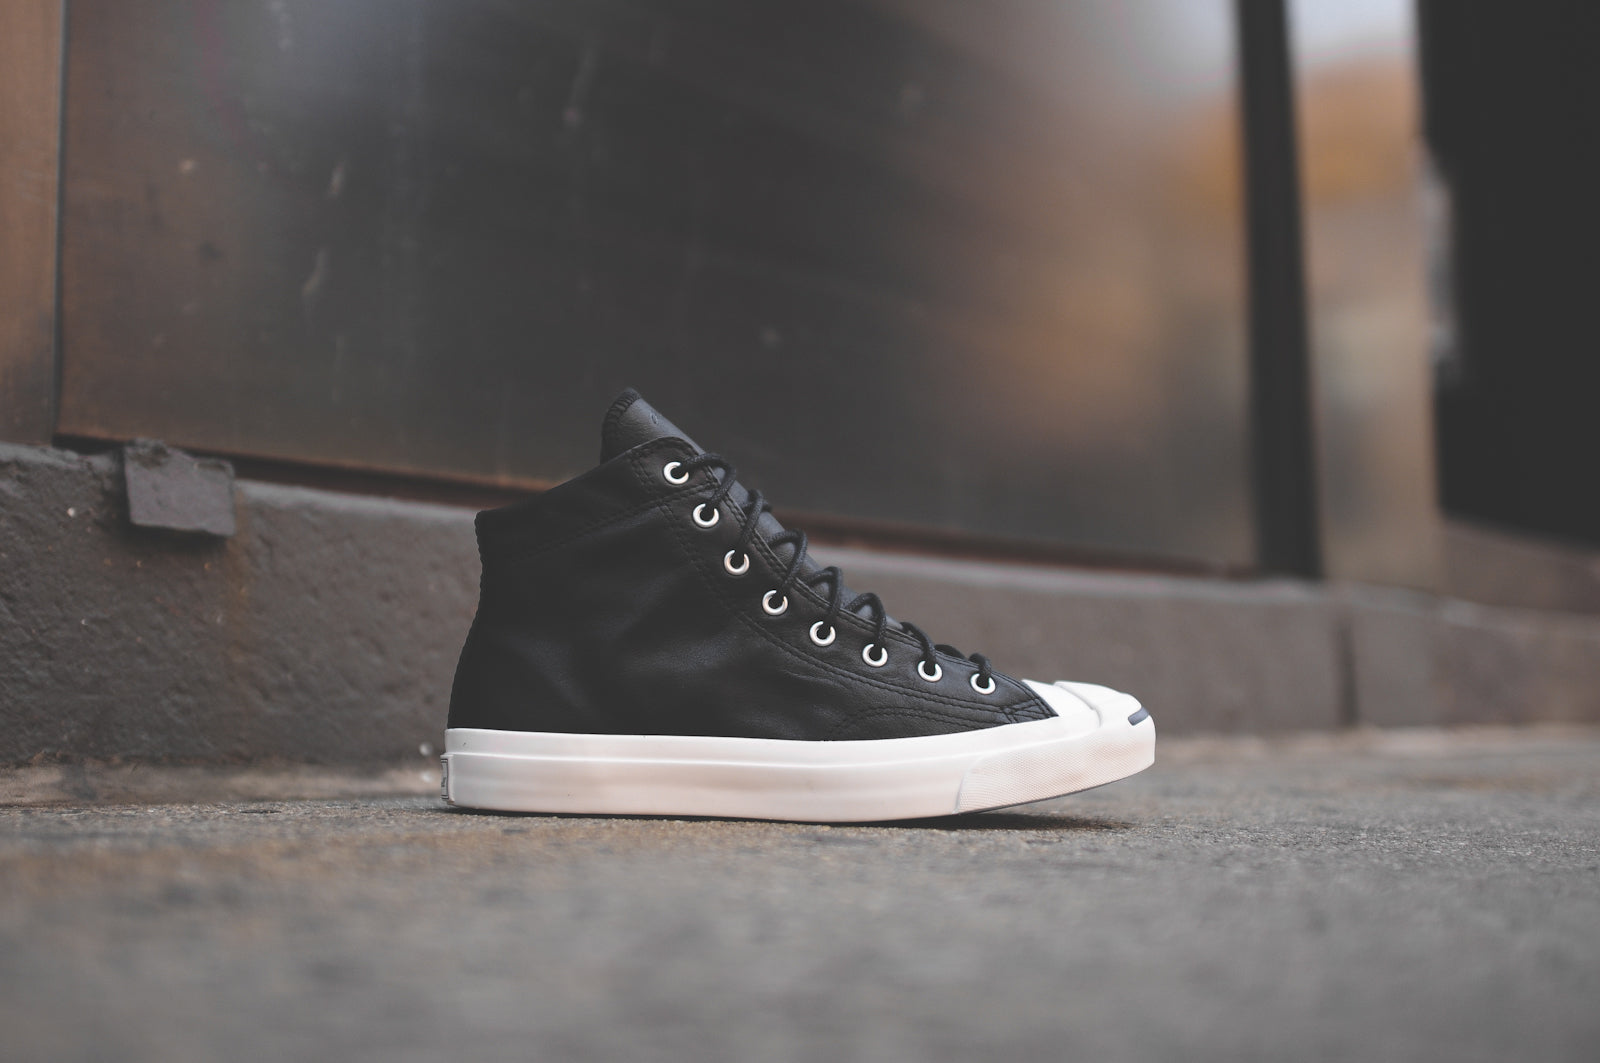 CONVERSE JACK PURCELL JACK MID - BLACK & BROWN @ KITH NYC – Kith